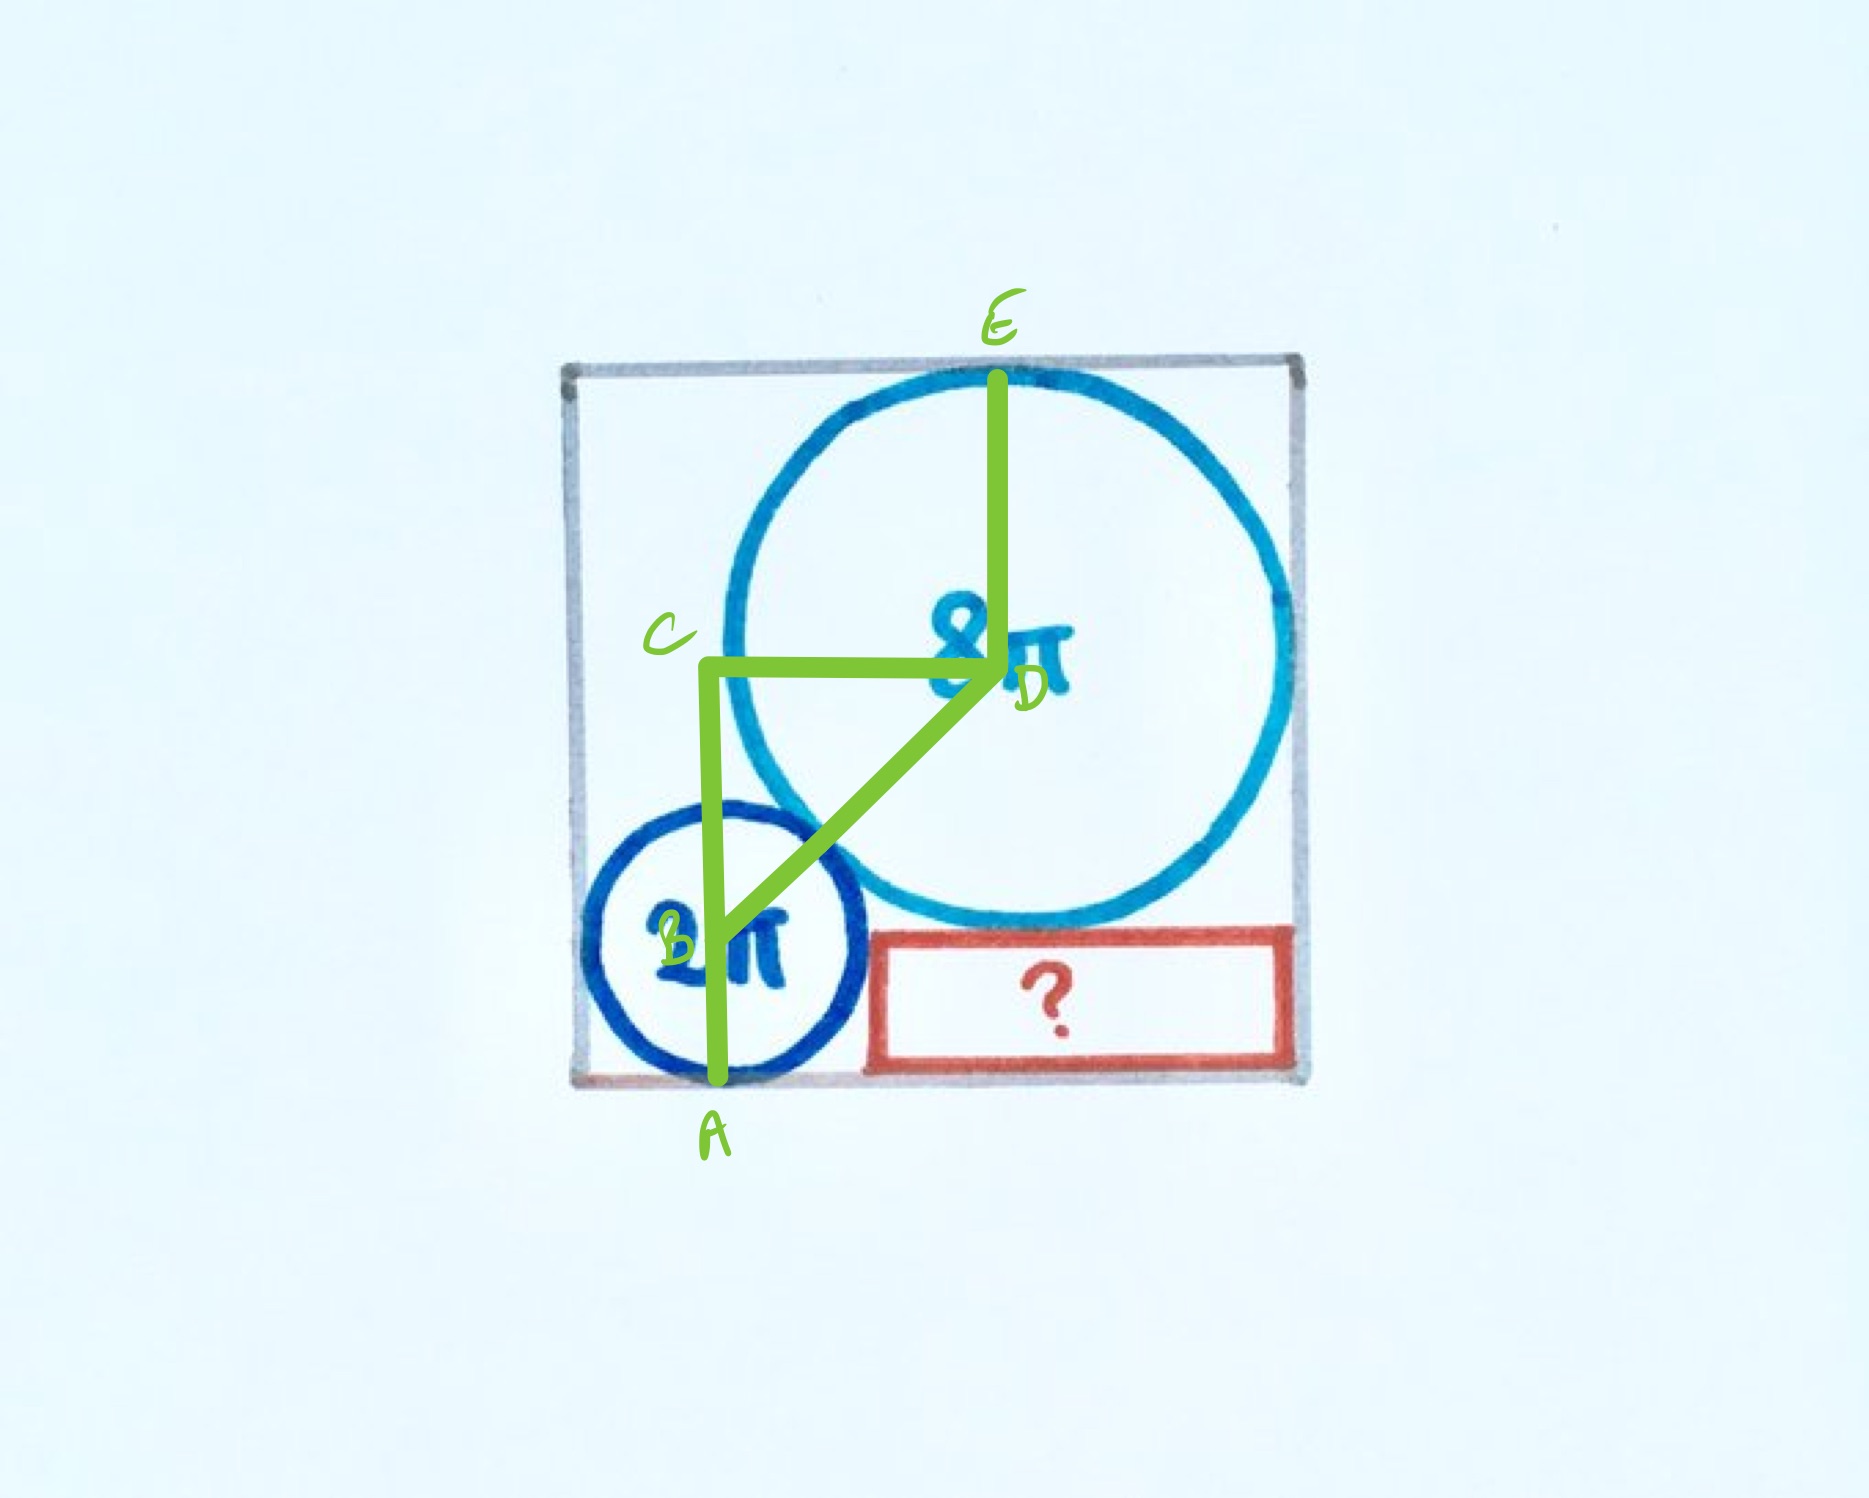 Two circles inside a square labelled